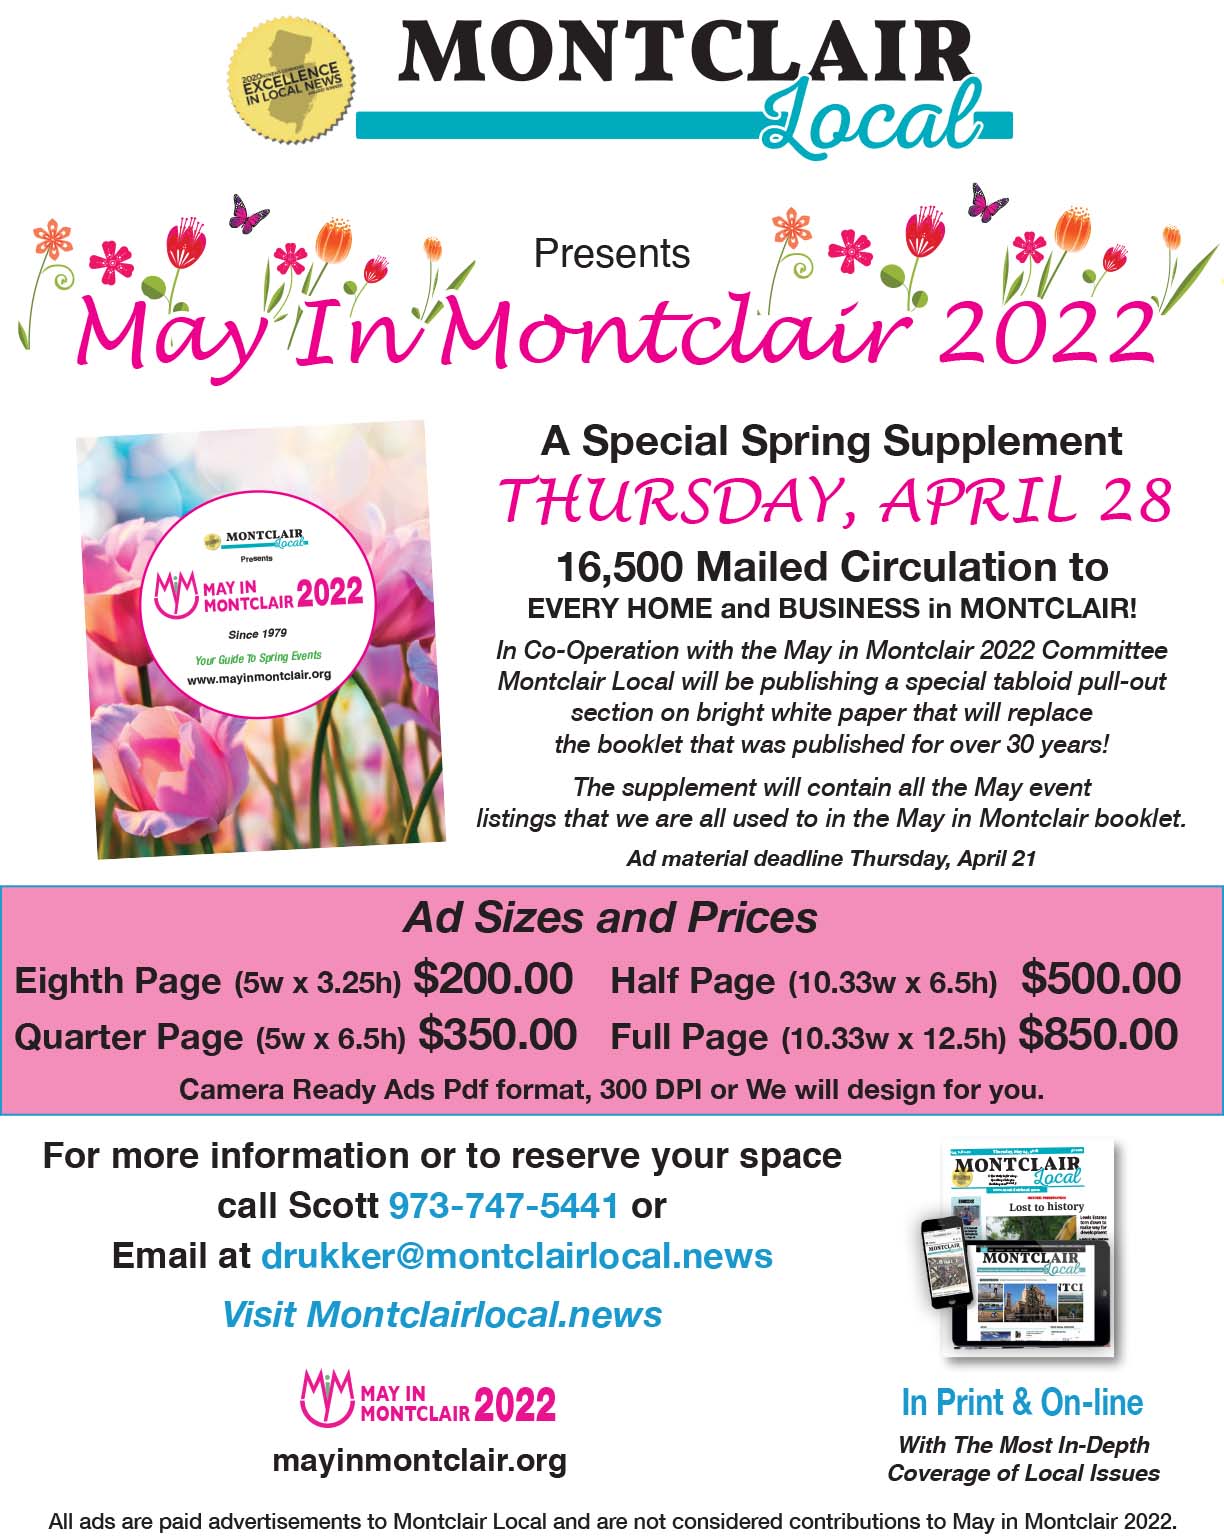 Montclair Local is printing the 2022 May in Montclair Calendar of Events. Advertise in the special supplement to reach all 16,500 households and businesses in Montclair.